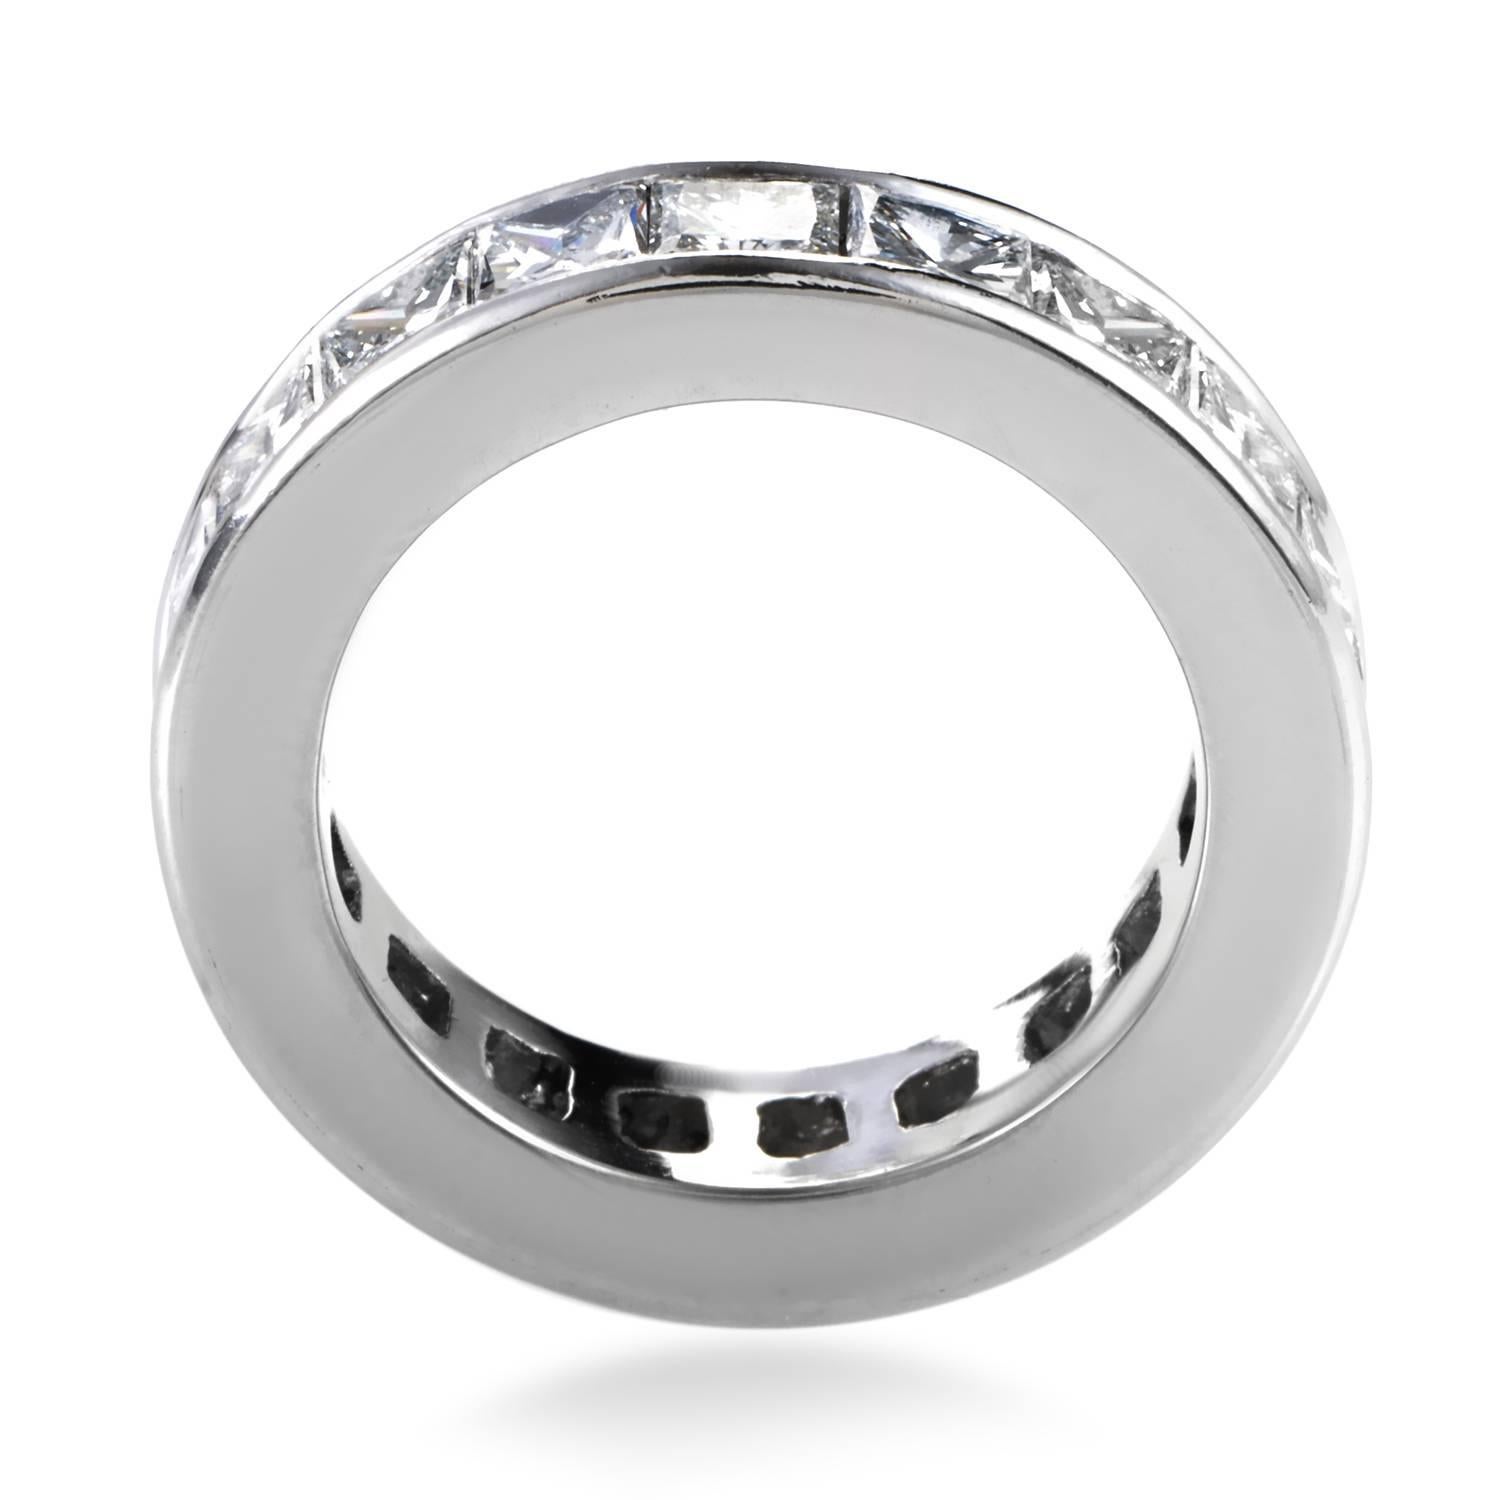 With fabulous prestige in its essence and fascinating perfection in its appearance, this wonderfully scintillating wedding band boasts a neat platinum body and a brilliant arrangement of diamonds weighing in total 6.50 carats for an experience of